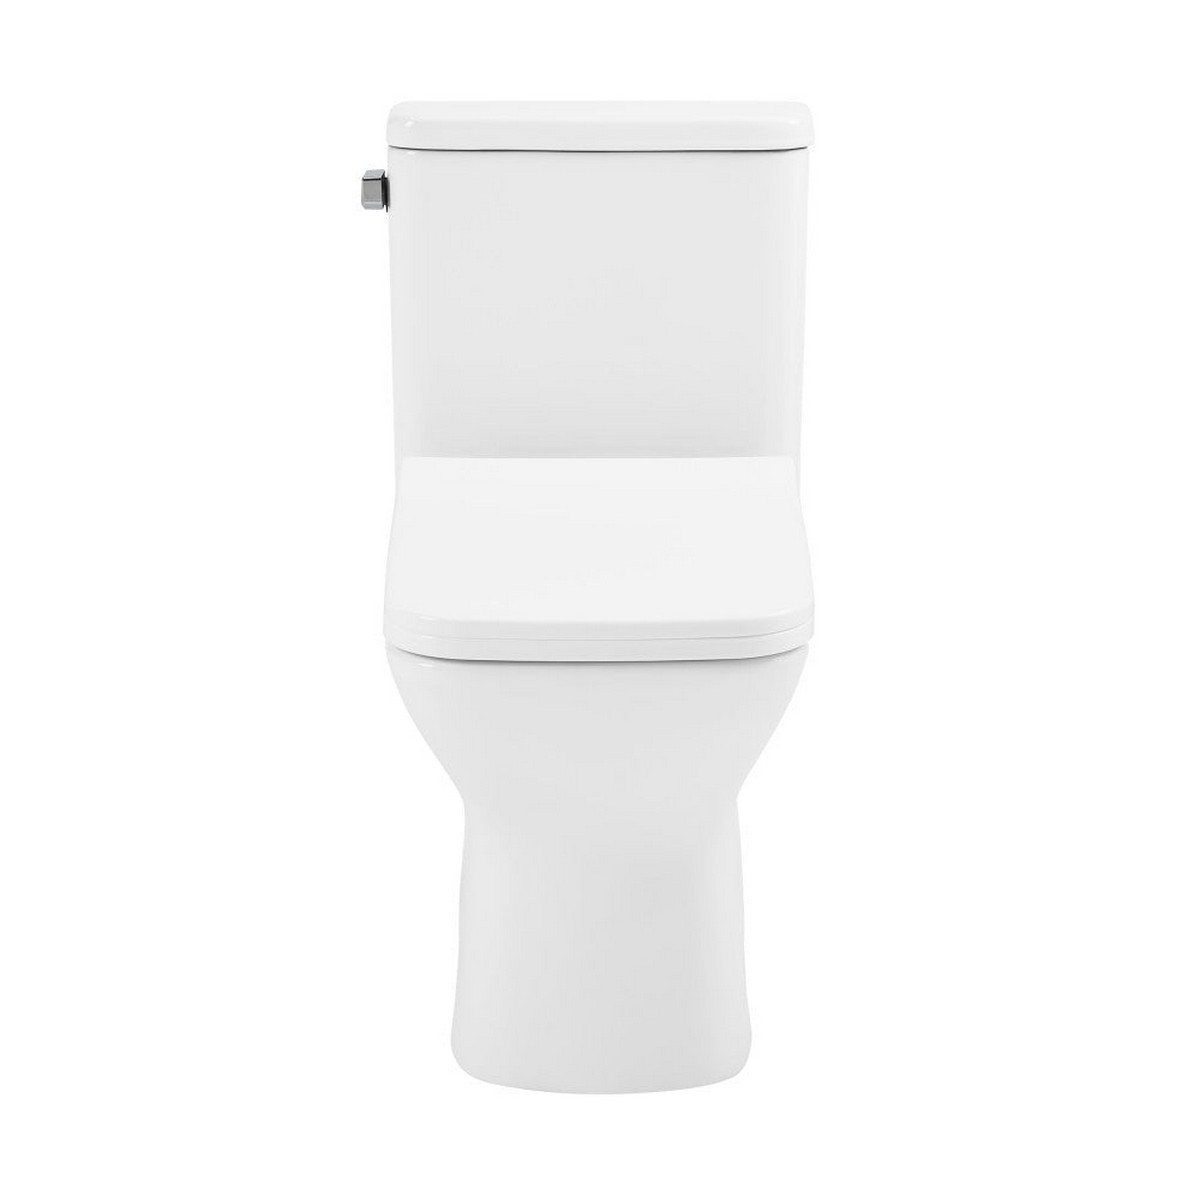 SWISS MADISON SM-1T272 CARRE 1.28 GPF LEFT SIDE FLUSH ONE PIECE SQUARE TOILET IN GLOSSY WHITE